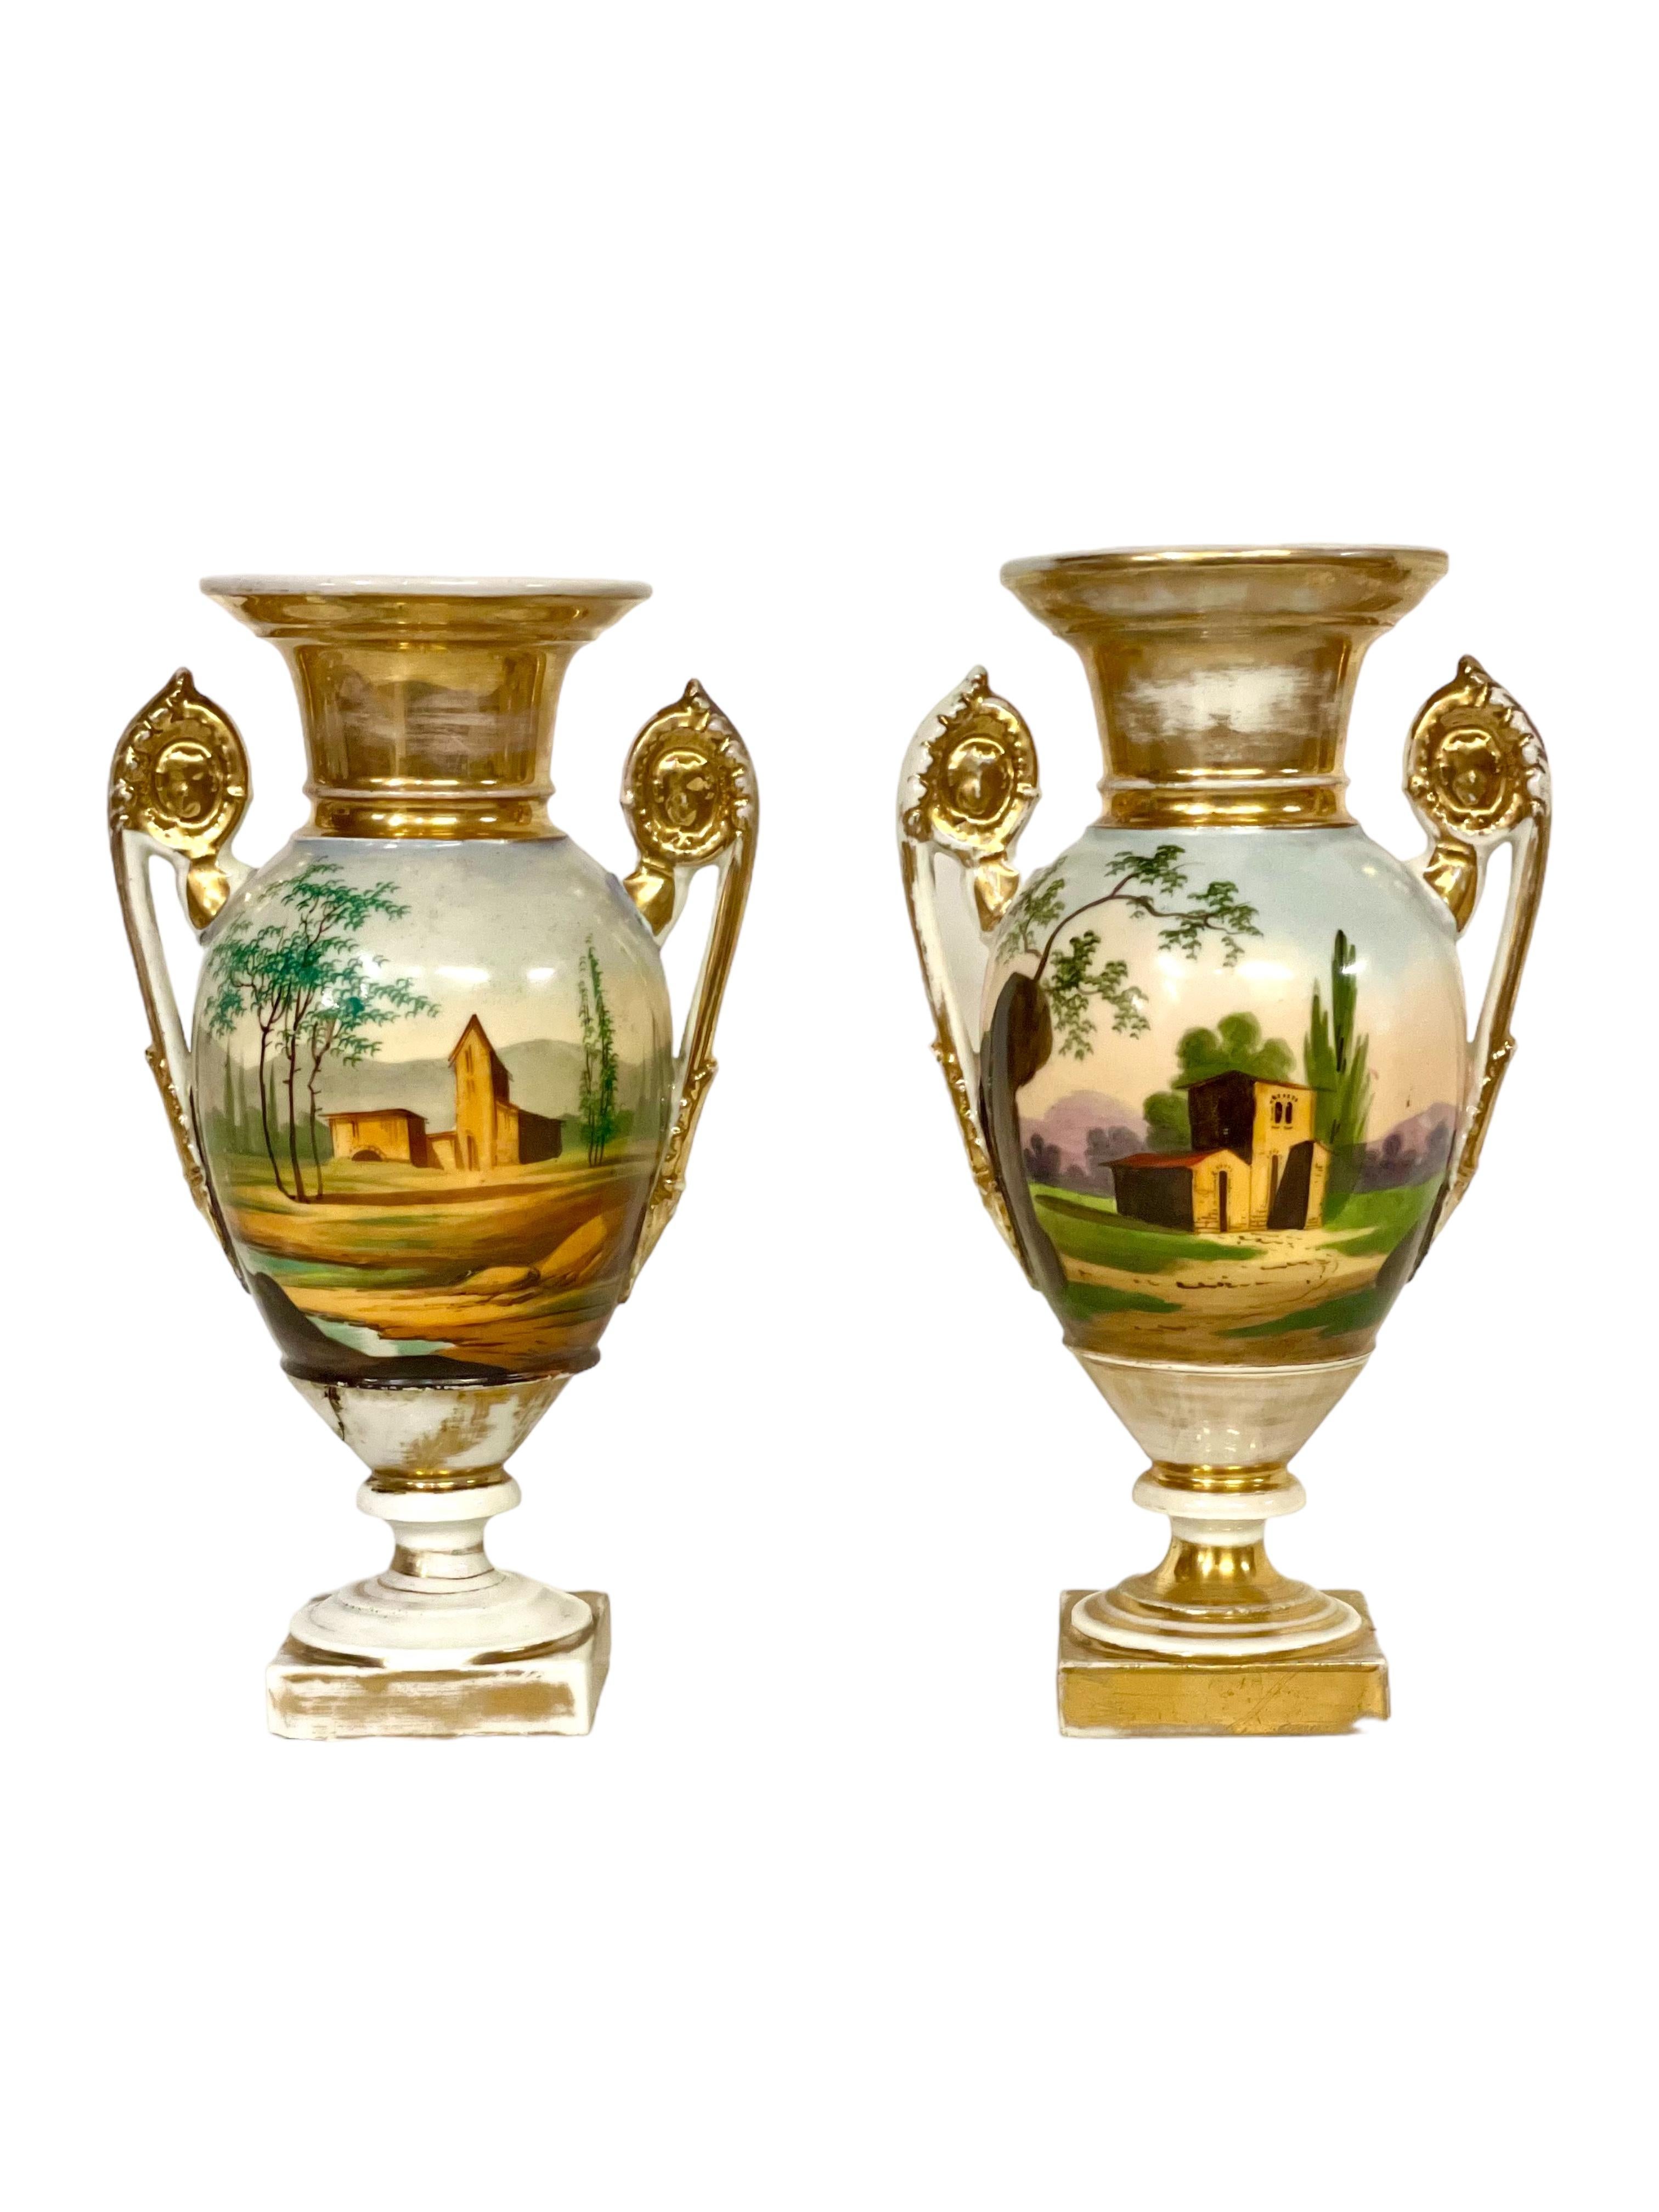 A fine pair of antique French urns in 'Porcelain de Paris', and dating from the early 19th century. These sensational vases are decorated with hand-painted romantic scenes featuring rustically dressed lovers and countryside buildings and landscapes,